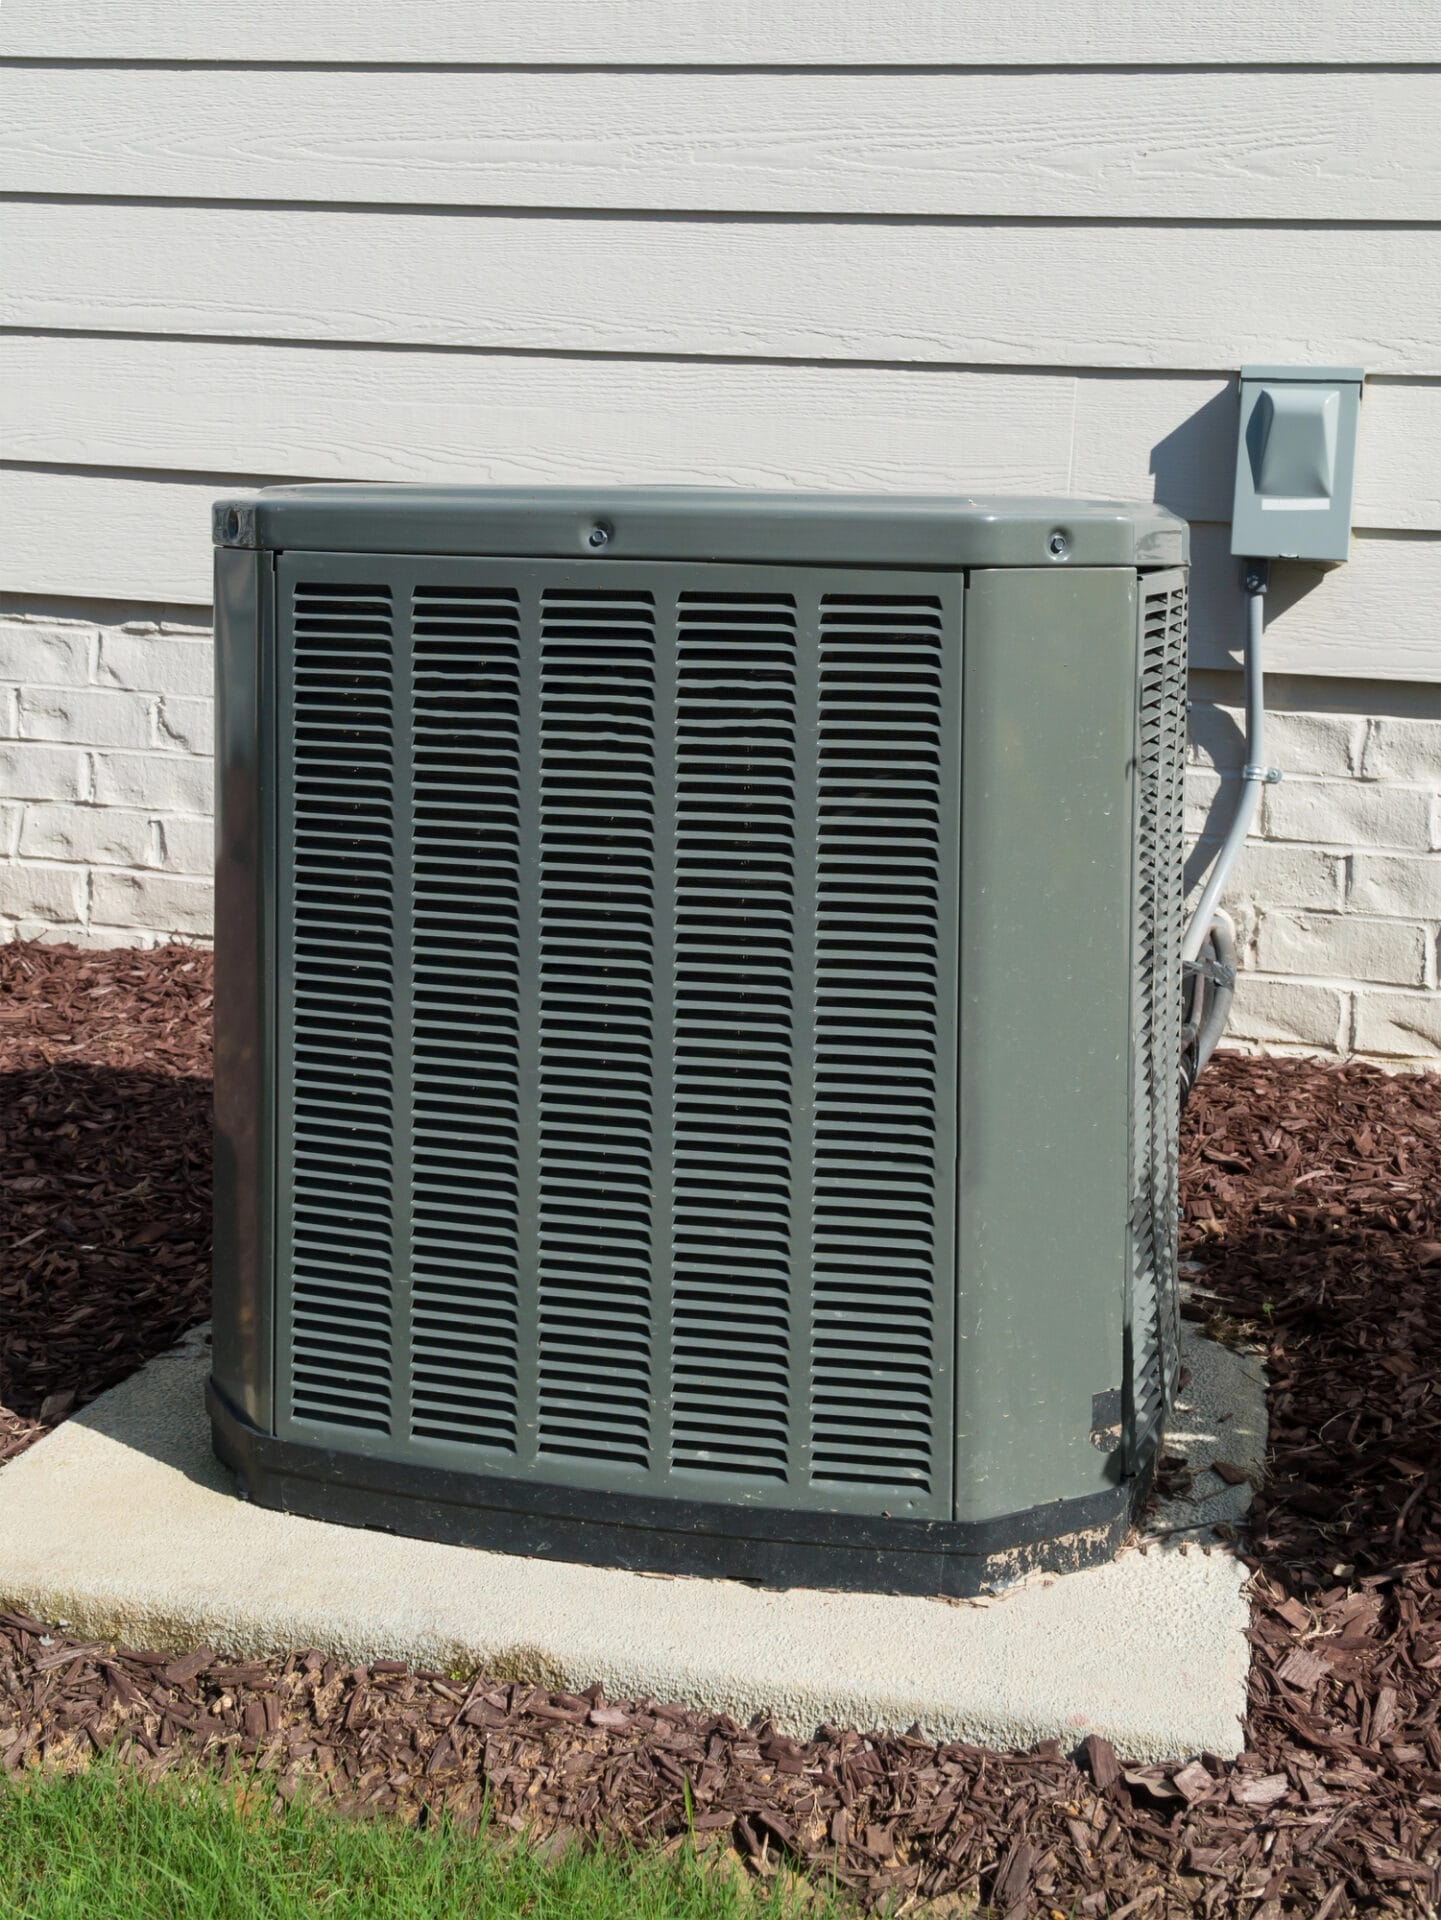 Residential central air conditioning unit installed outside a home.